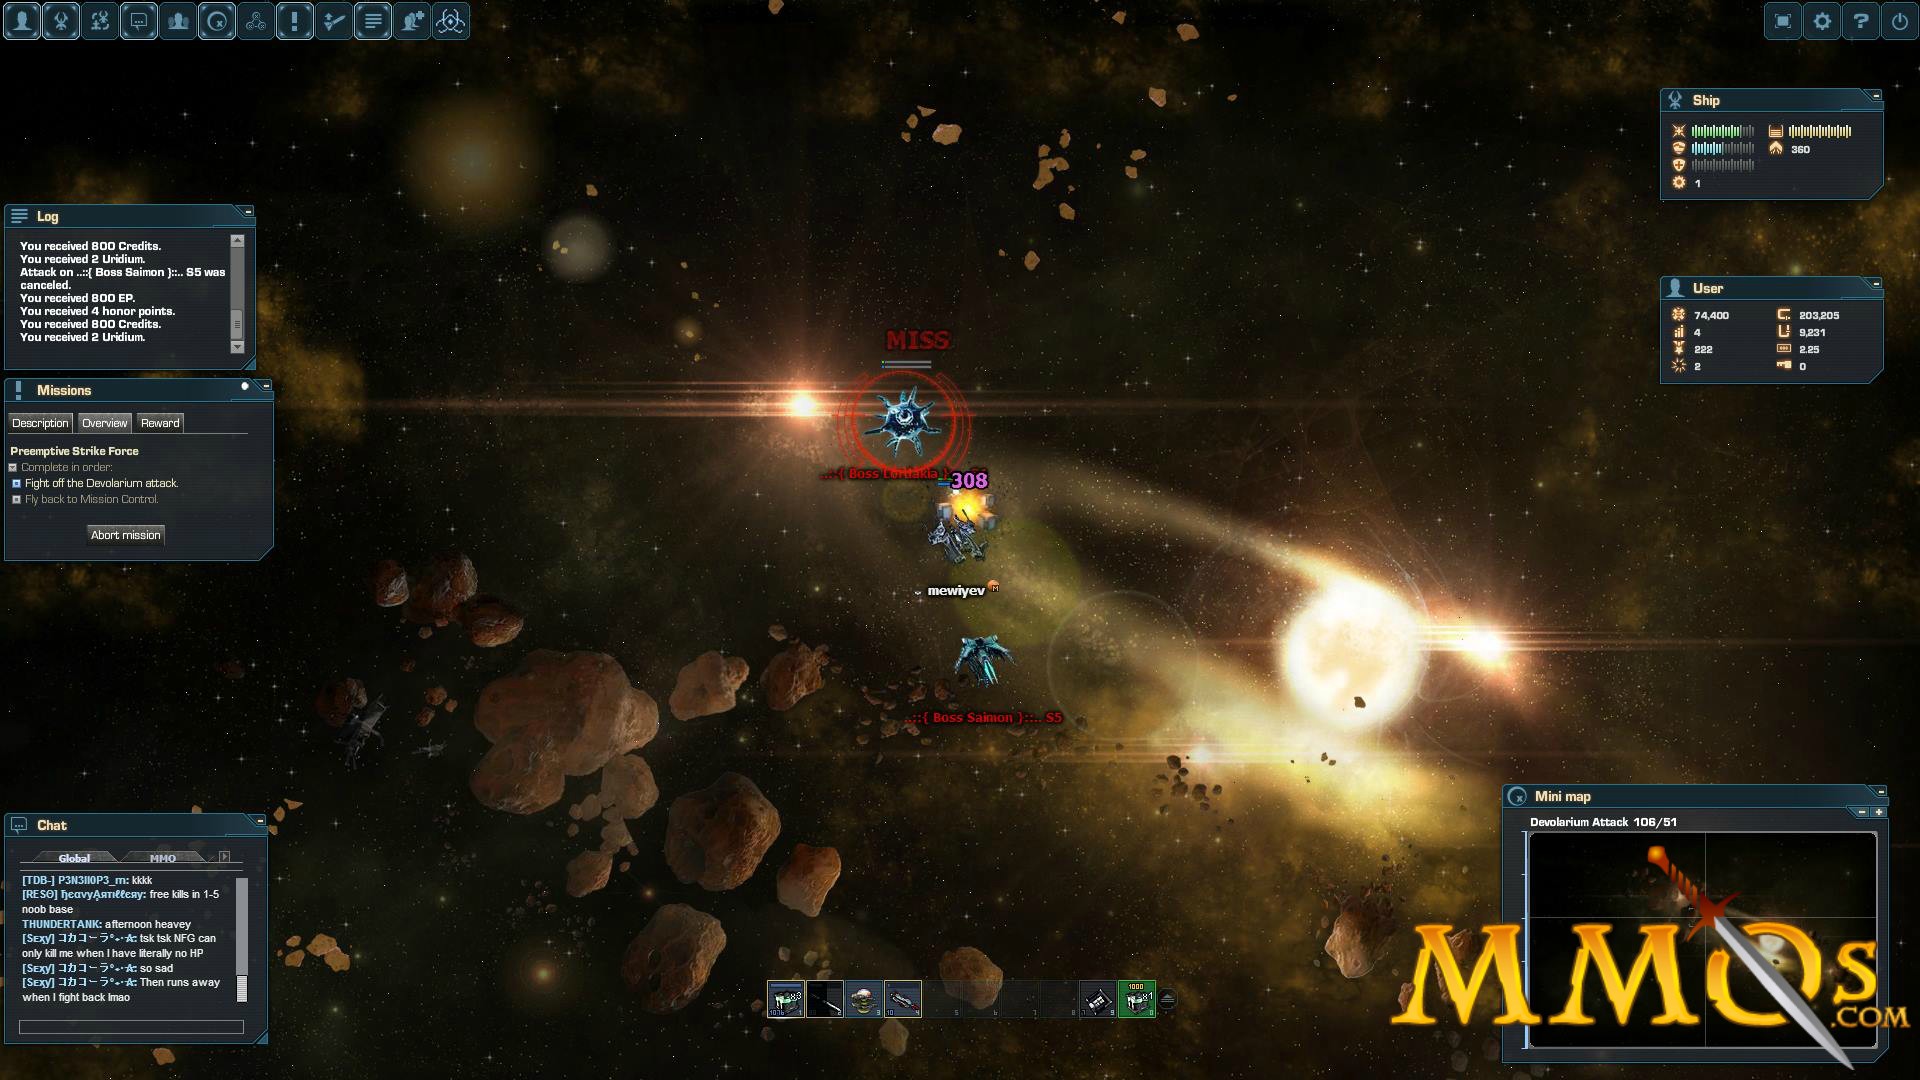 space mmo browser based games